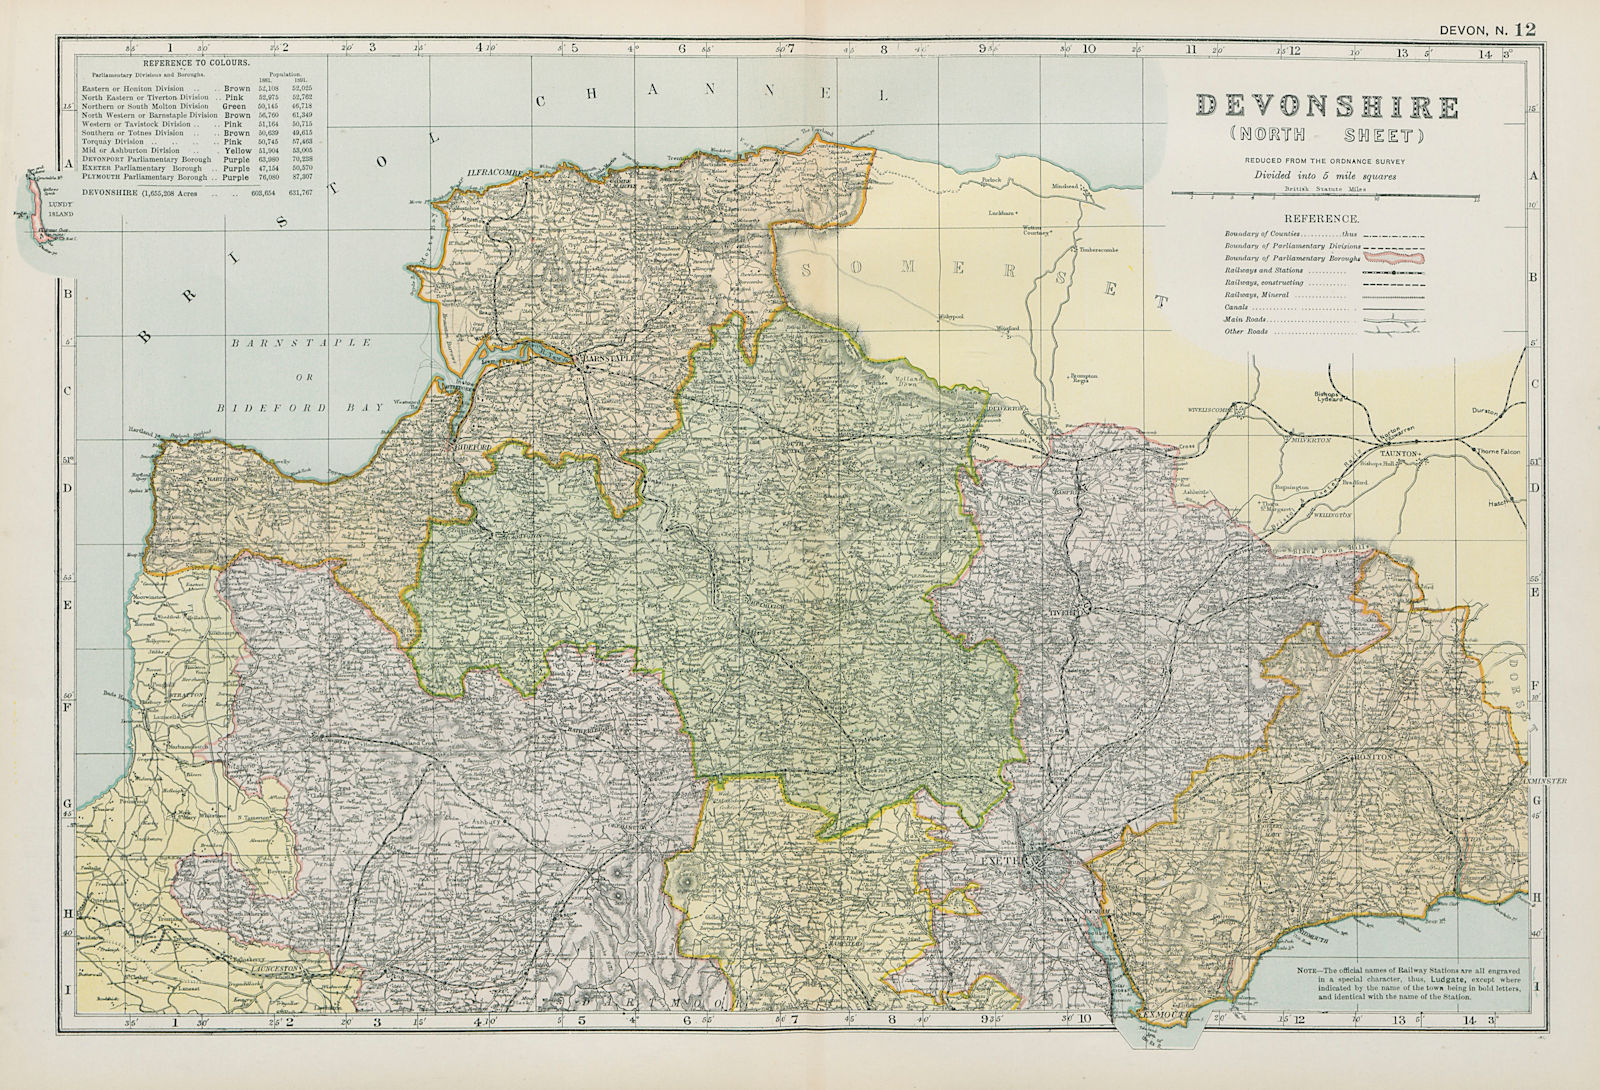 DEVONSHIRE (NORTH) . Parliamentary divisions. Parks. Devon. BACON 1900 old map